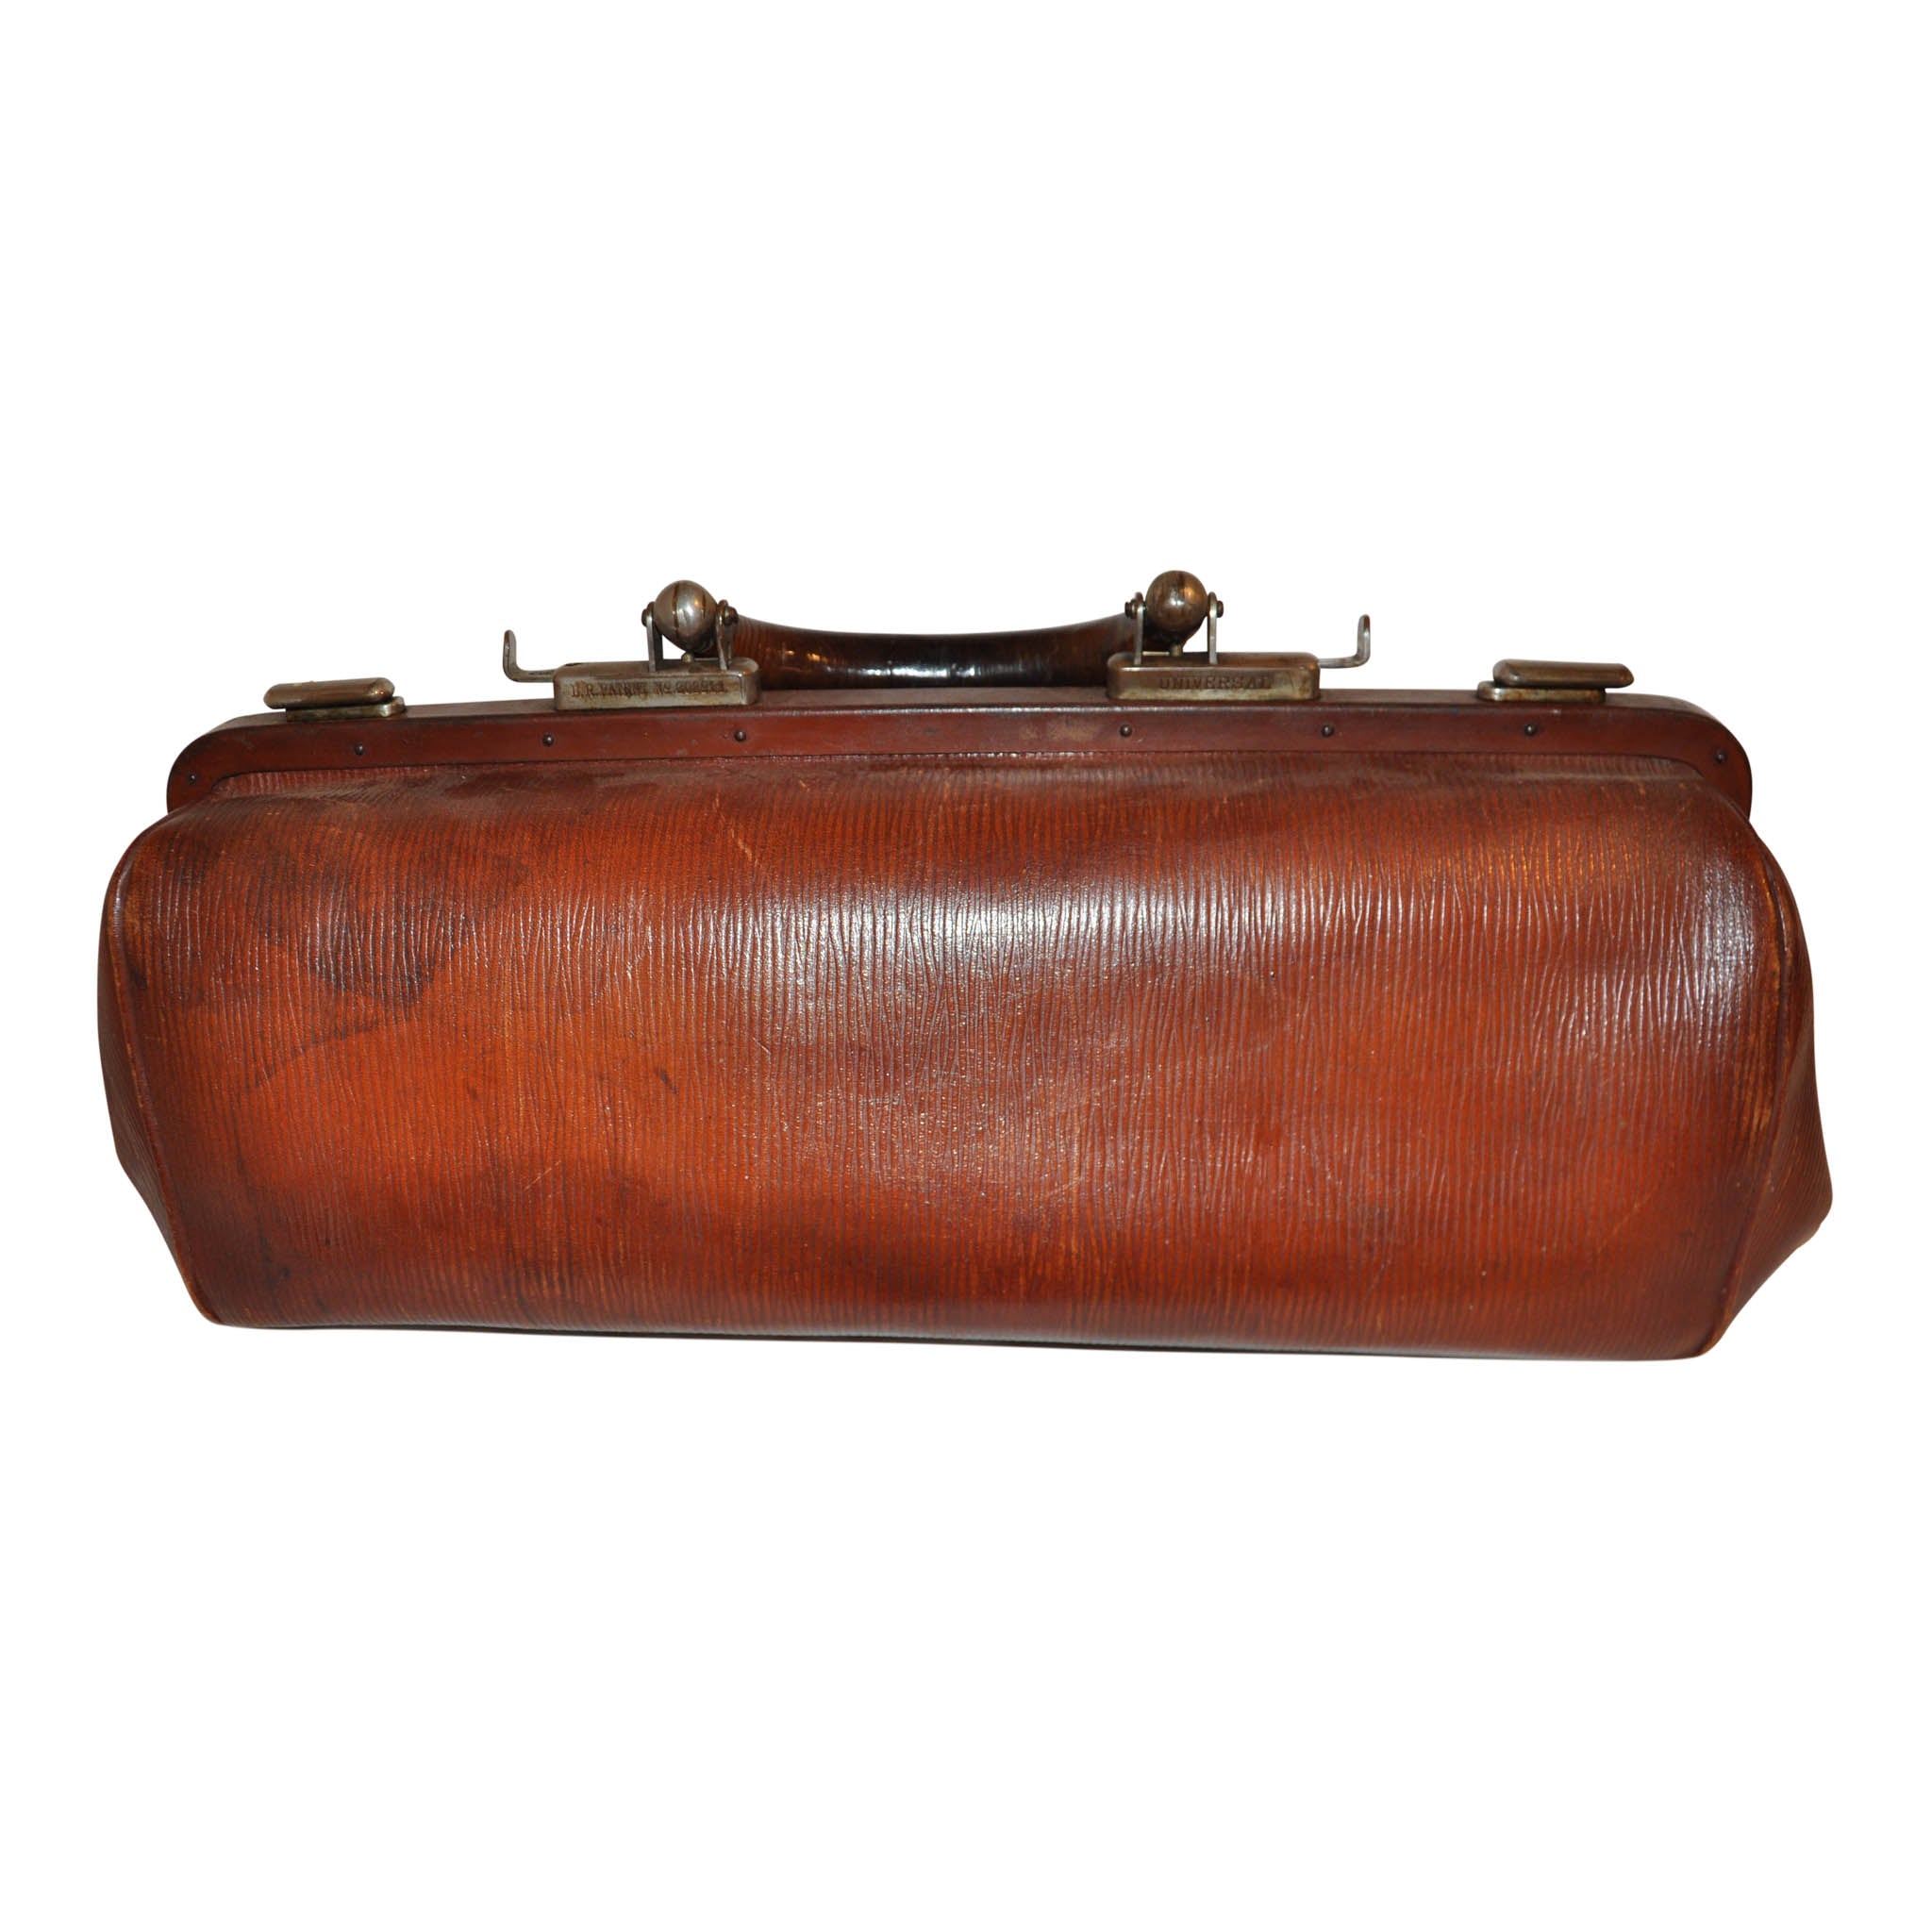 Leather Doctor's Bag